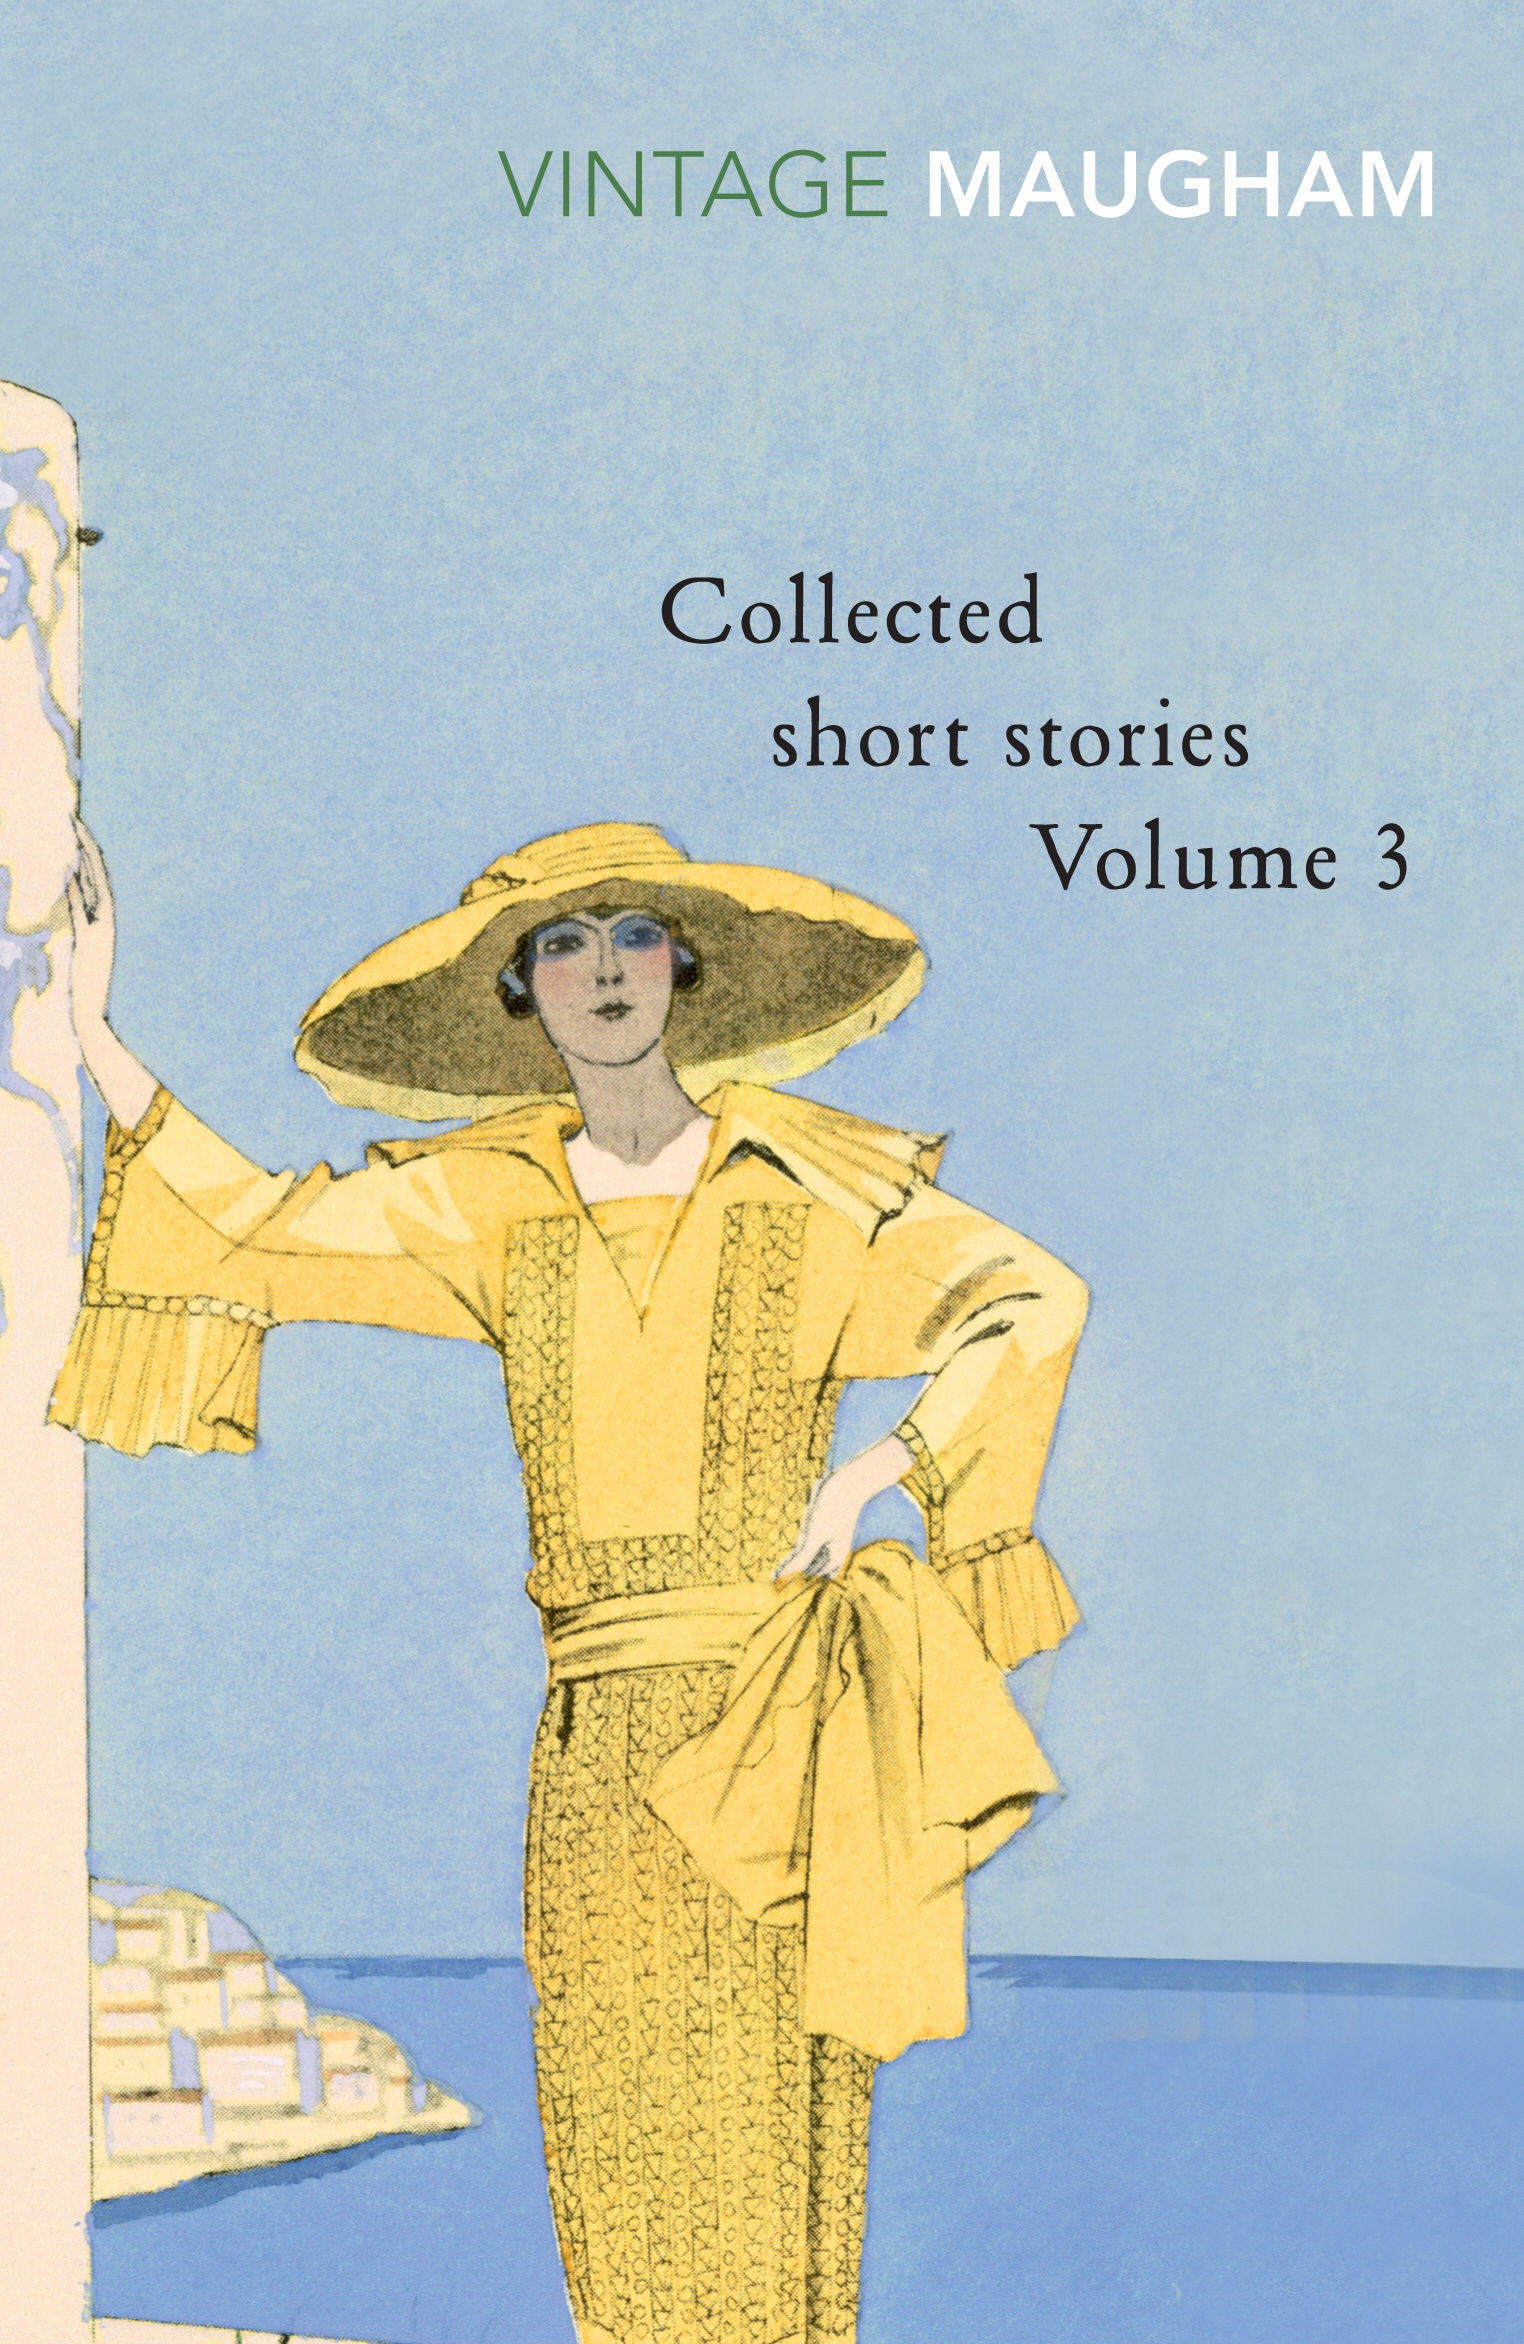 Book “Collected Short Stories Volume 3” by W. Somerset Maugham — February 7, 2002